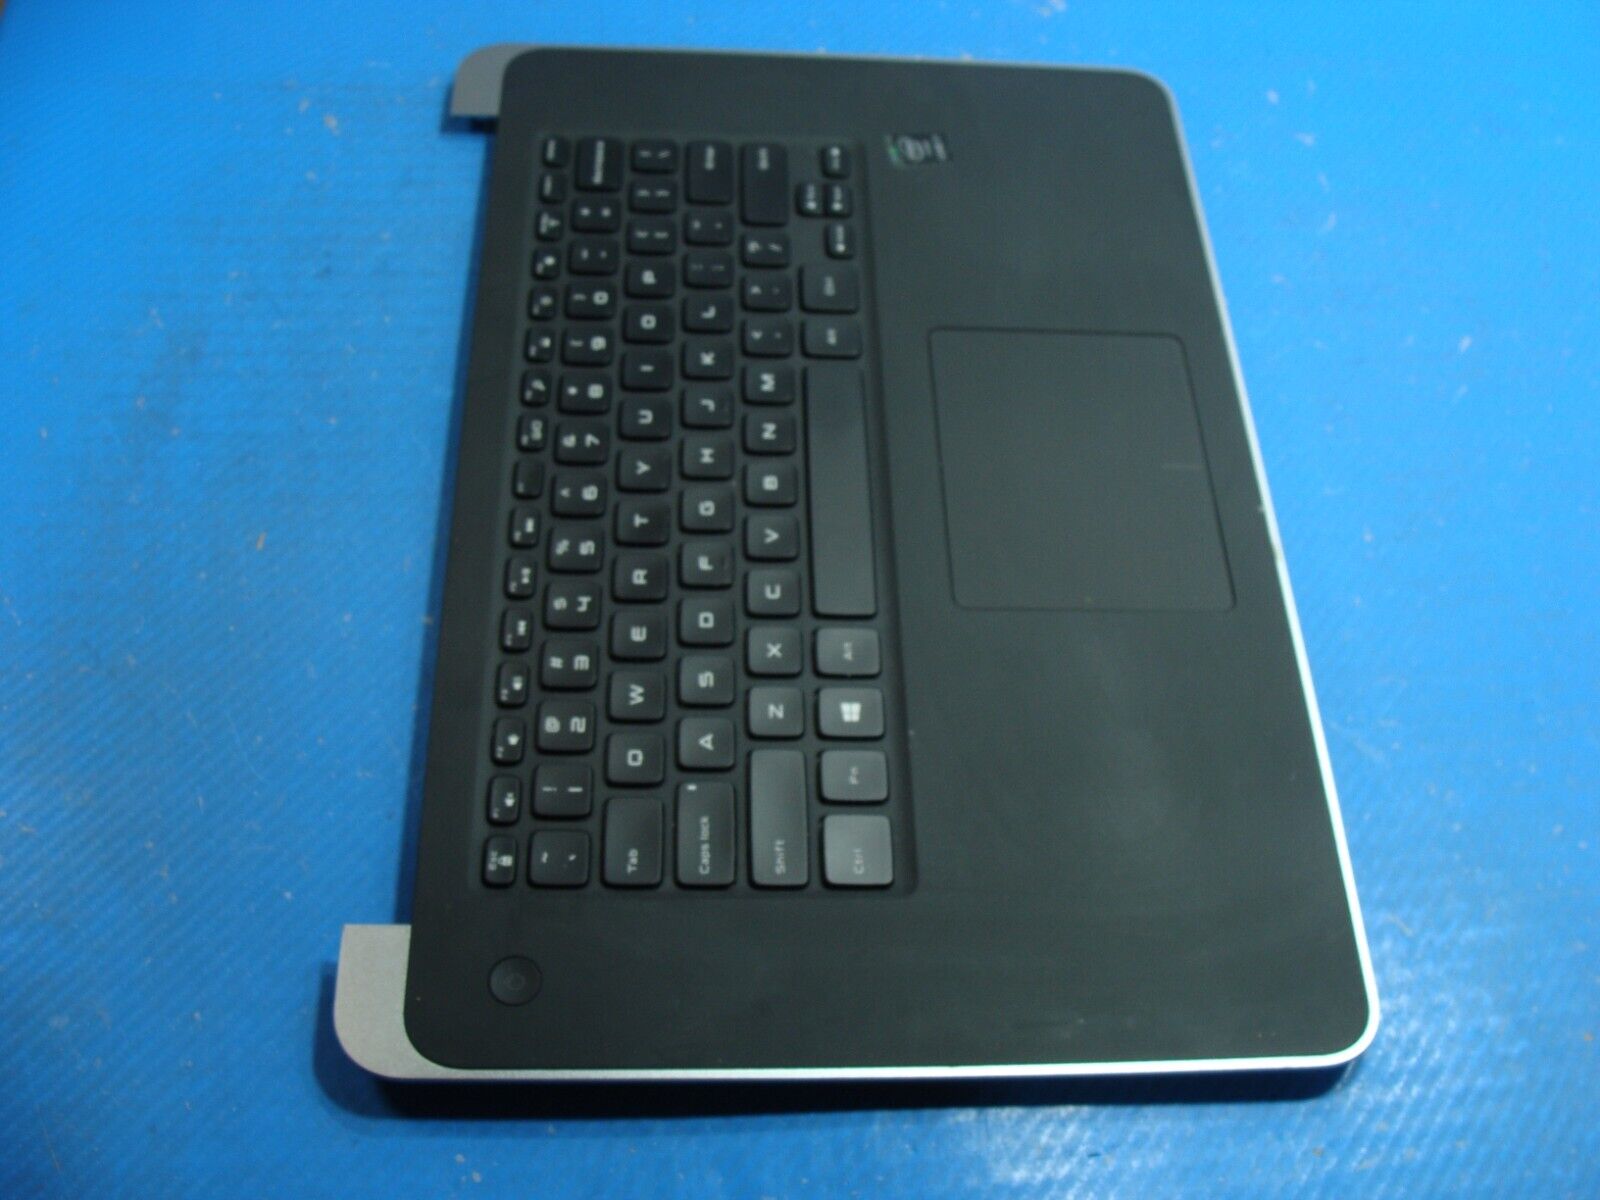 Dell XPS 15 9530 15.6